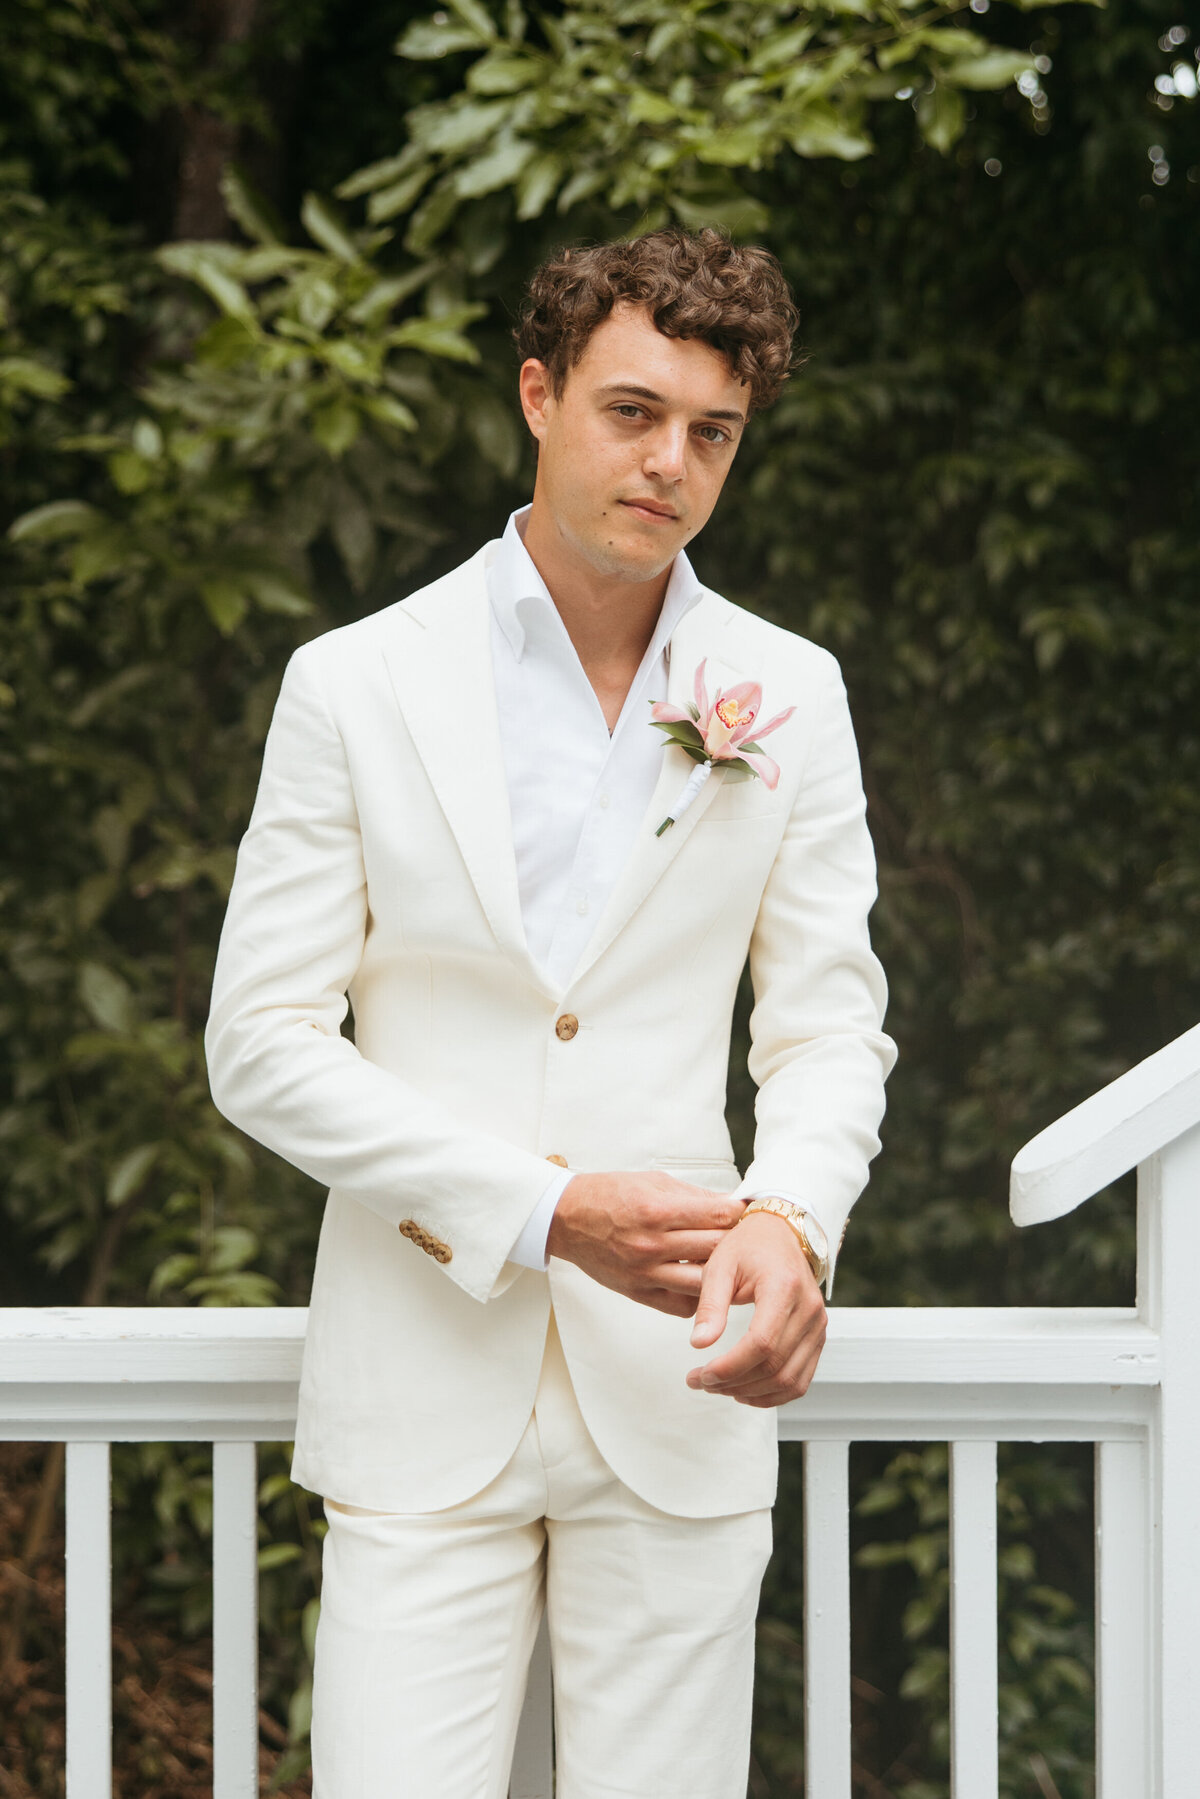 Groom in a white suit adjusting his jacket, looking directly at the camera